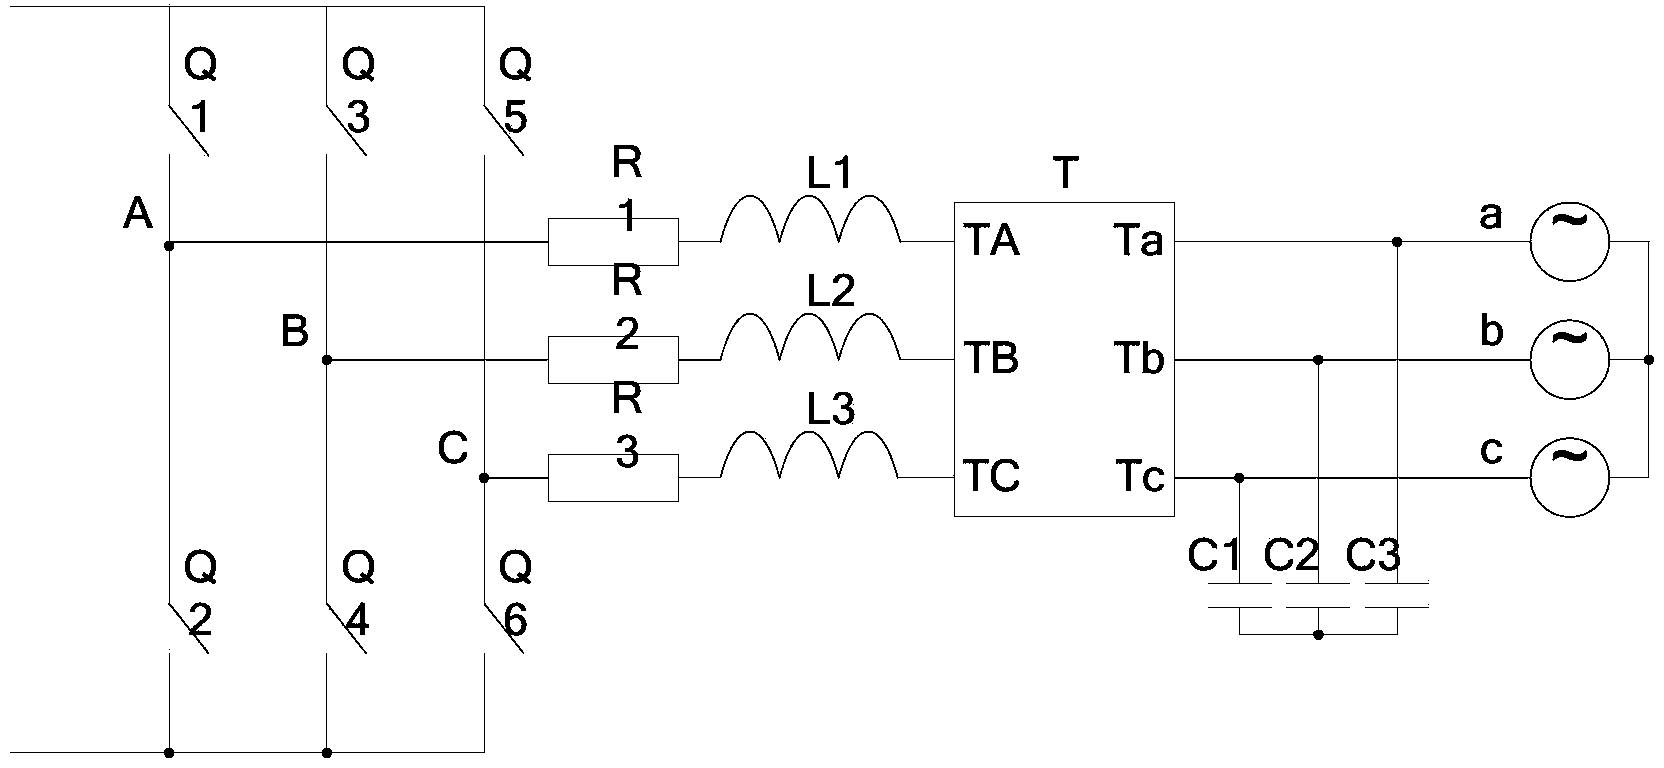 Positive and negative sequence component separation method of low-voltage ride-through control of photovoltaic grid-connected inverter